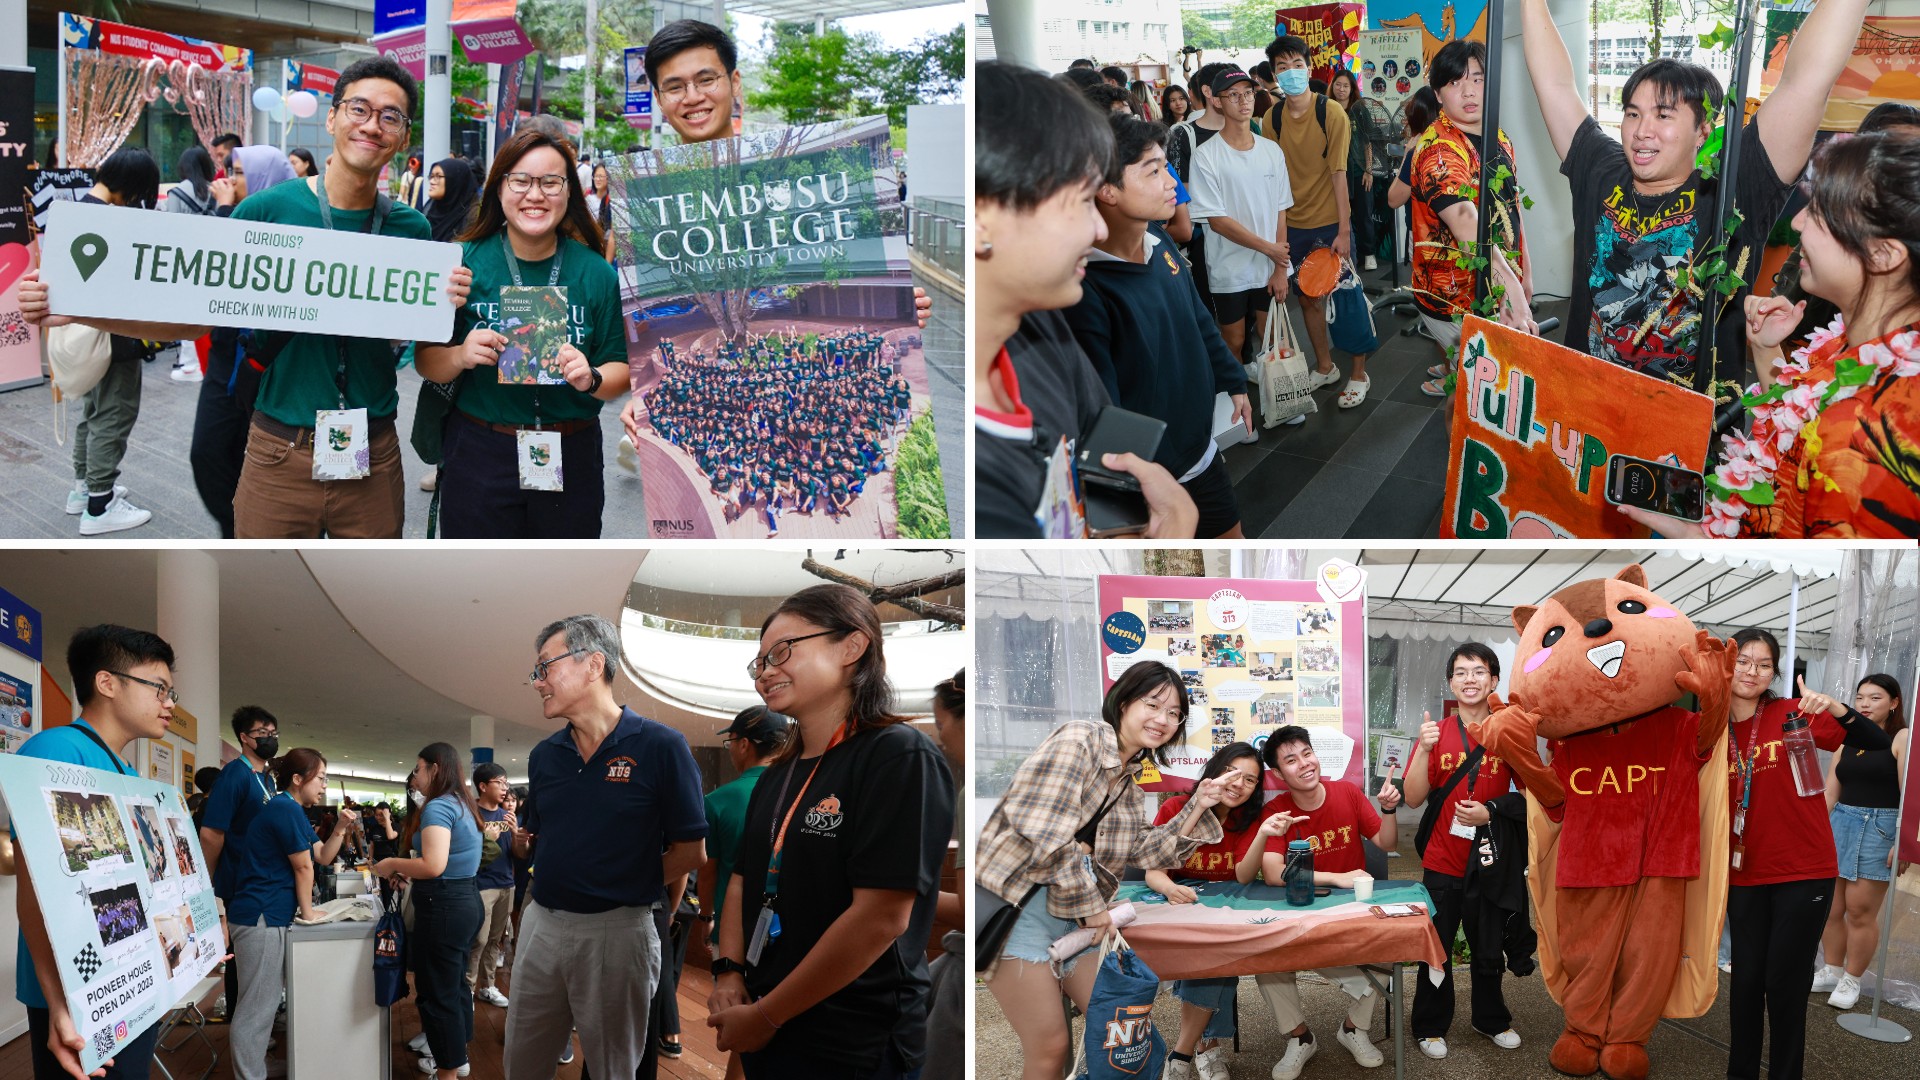 The plethora of informative booths, manned by friendly student representatives, gave visitors a chance to learn more about what residential life in NUS entails.